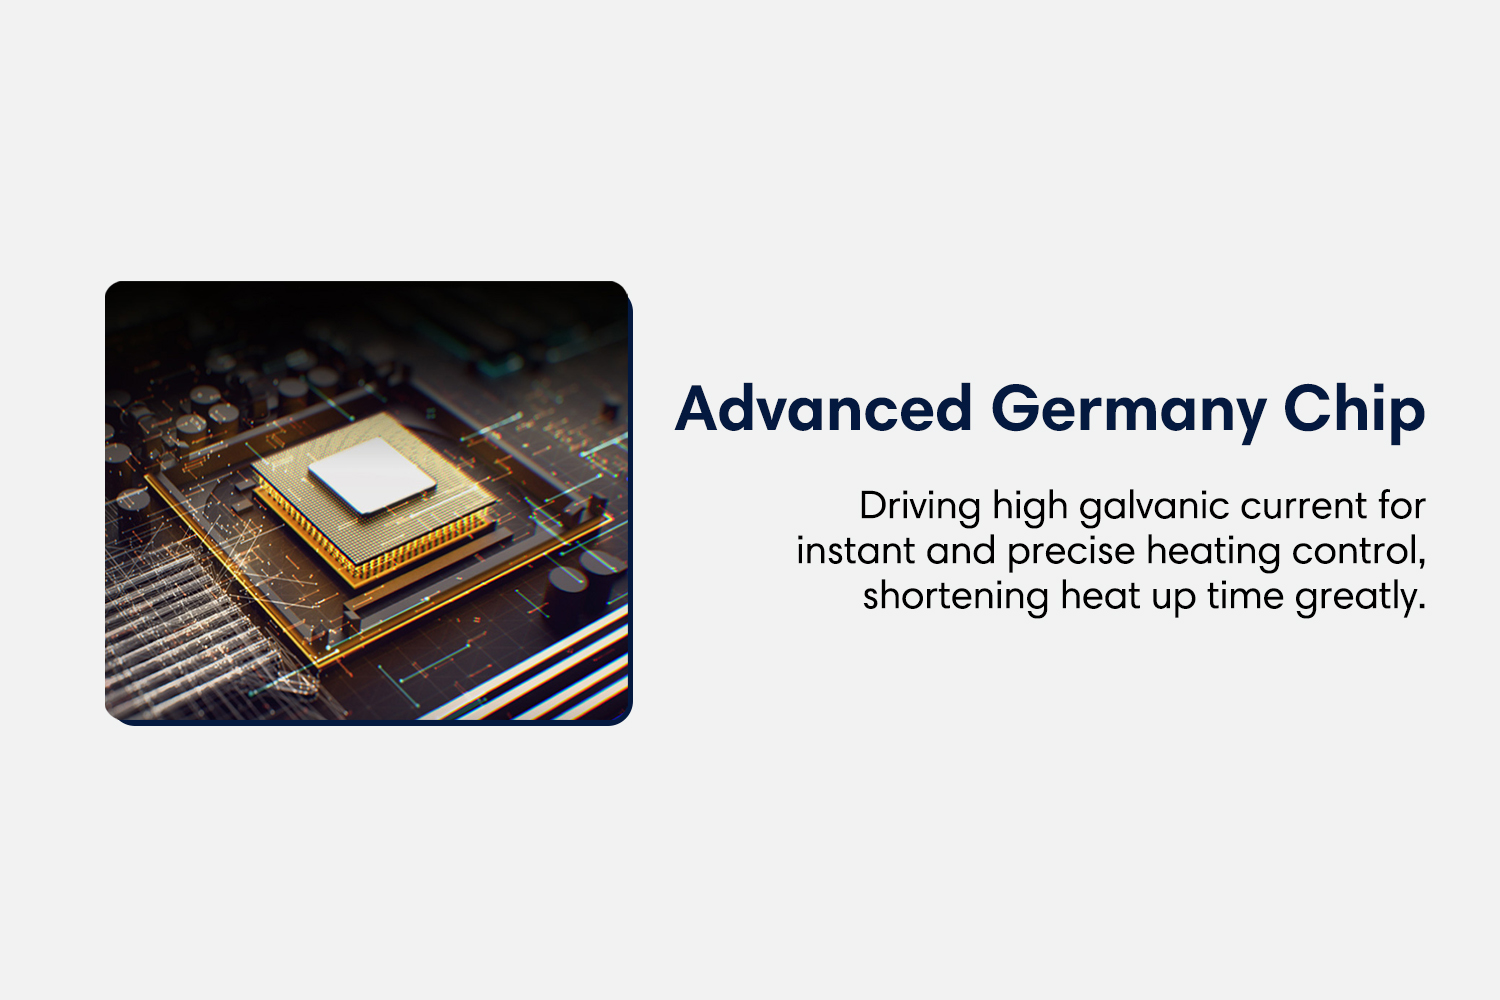 Advanced Germany Chip Driving high galvanic current for instant and precise heating control, shortening heat up time greatly.